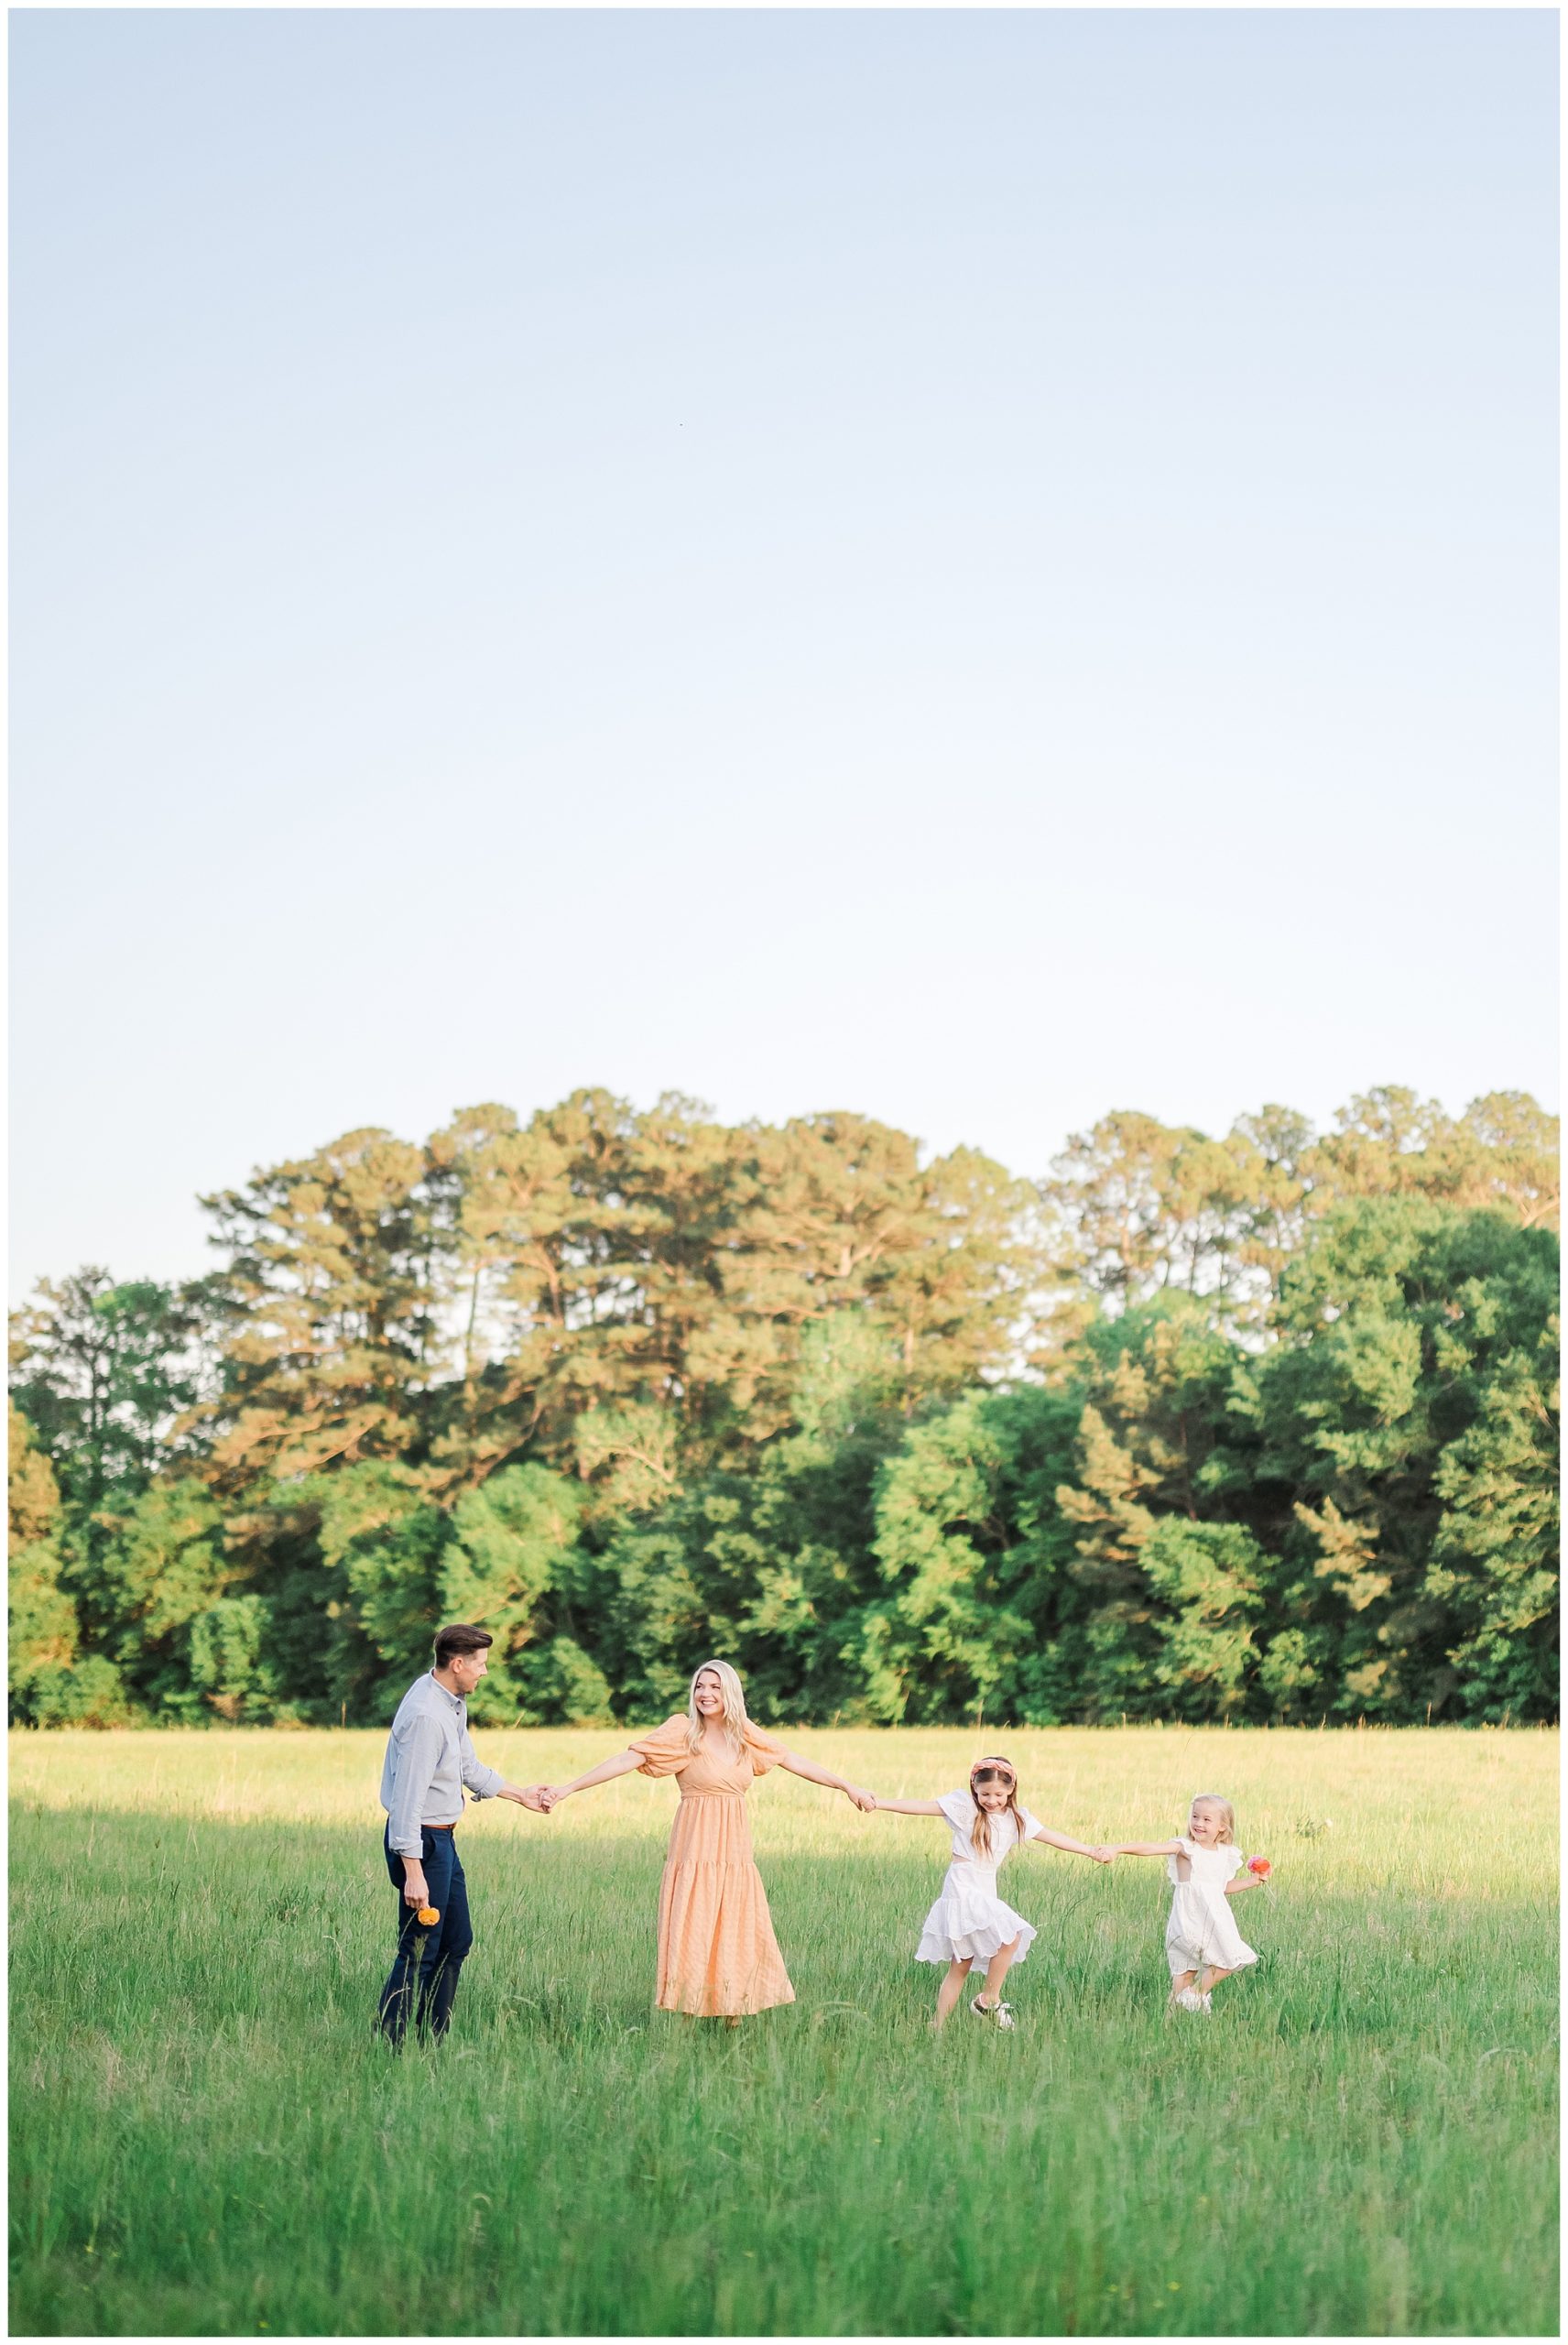 Family Photographer, The Woodlands Texas by Relics of Rainbows Photo